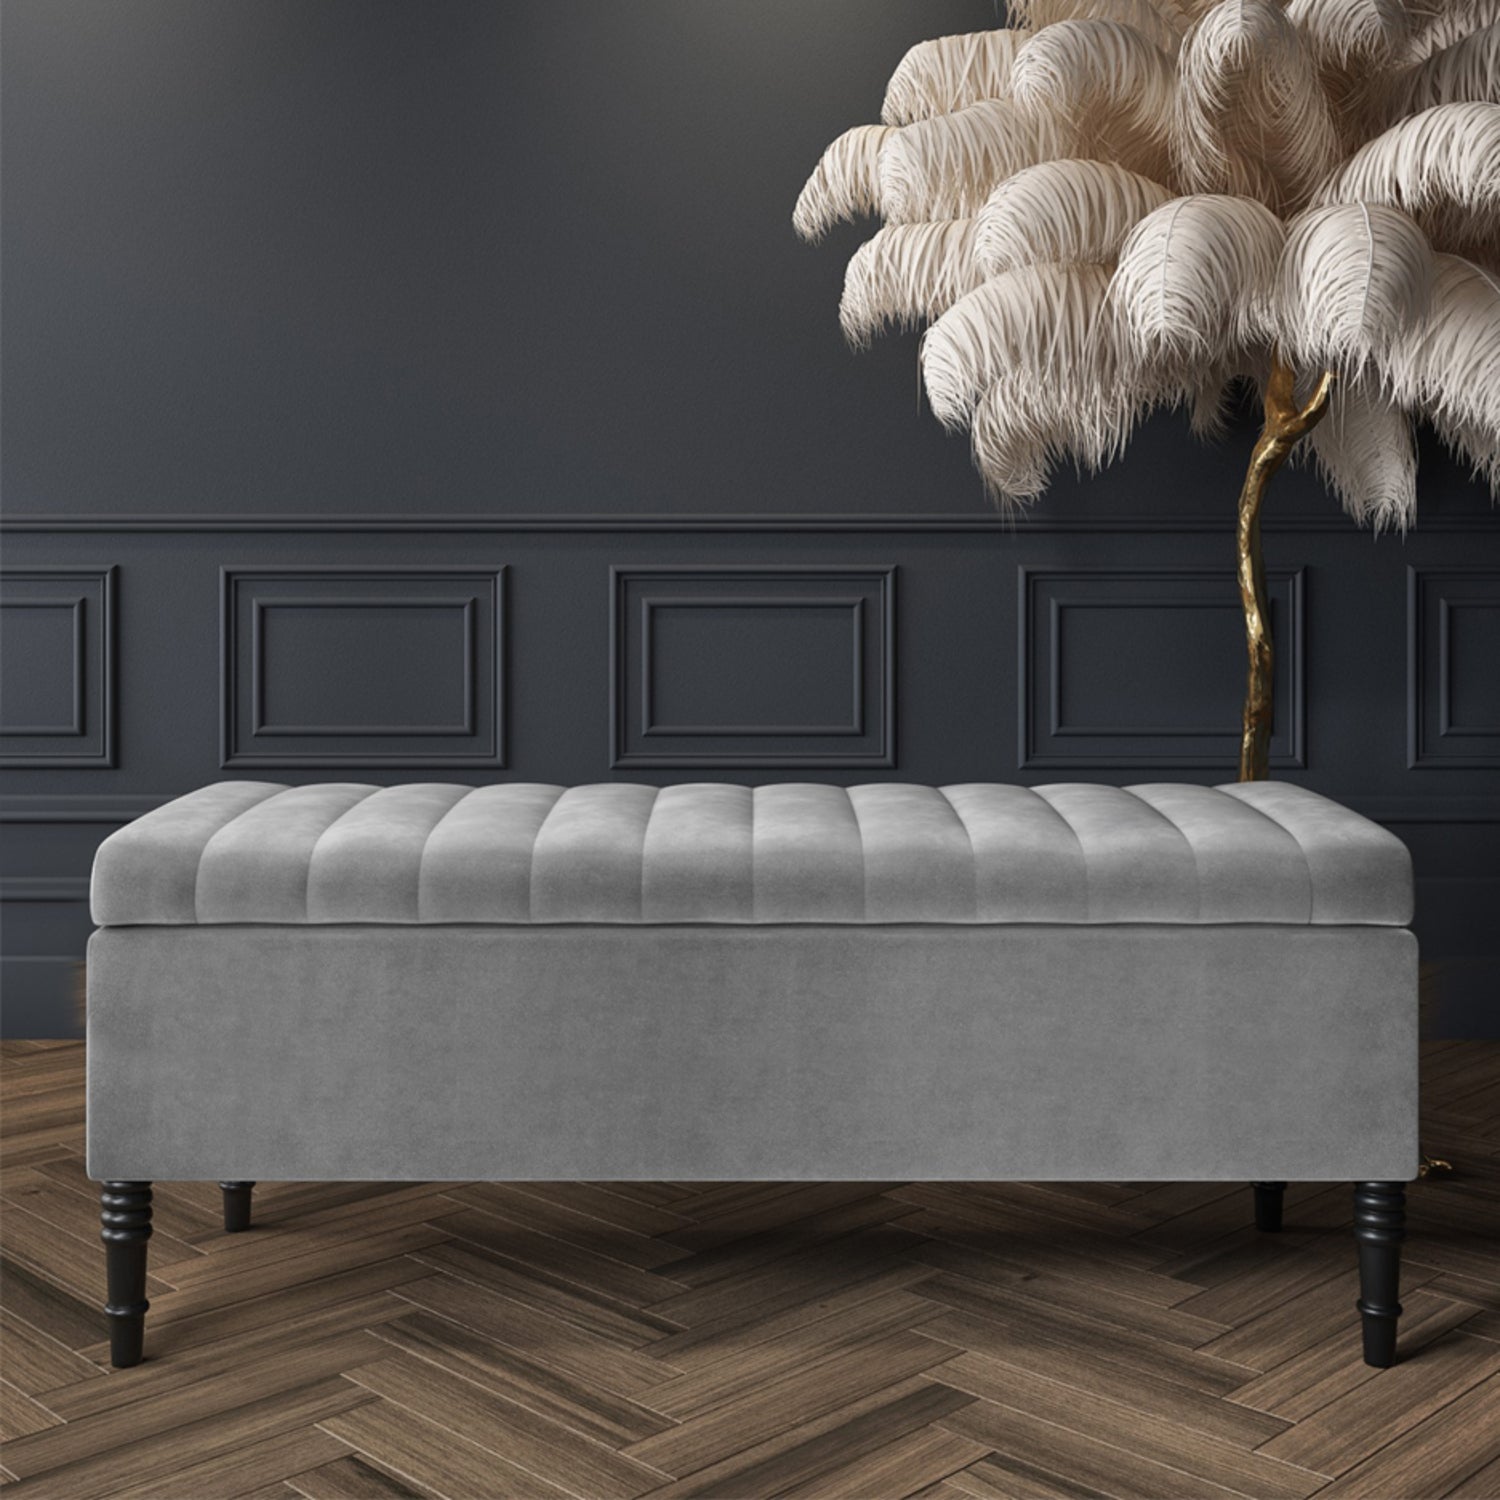 Grey plush velvet ottoman bench with storage, shoe storage bench, shoe changing bench. End of bed table with storage